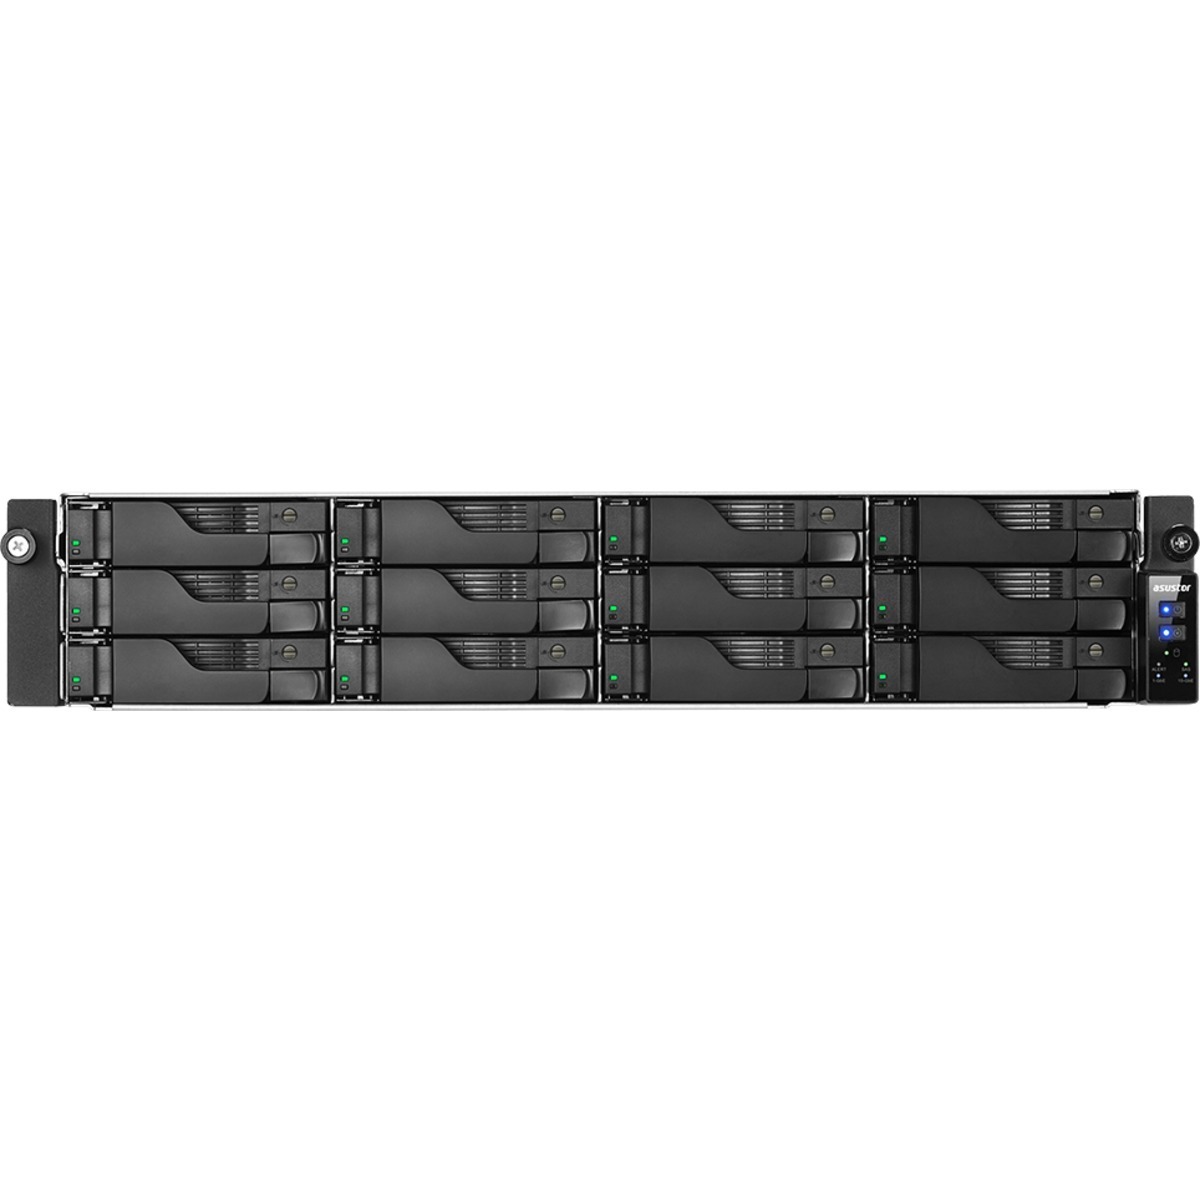 buy $10284 ASUSTOR AS7112RDX Lockerstor 12R Pro 264tb RackMount NAS - Network Attached Storage Device 12x22000gb Western Digital Red Pro WD221KFGX 3.5 7200rpm SATA 6Gb/s HDD NAS Class Drives Installed - Burn-In Tested - ON SALE - nas headquarters buy network attached storage server device das new raid-5 free shipping simply usa AS7112RDX Lockerstor 12R Pro